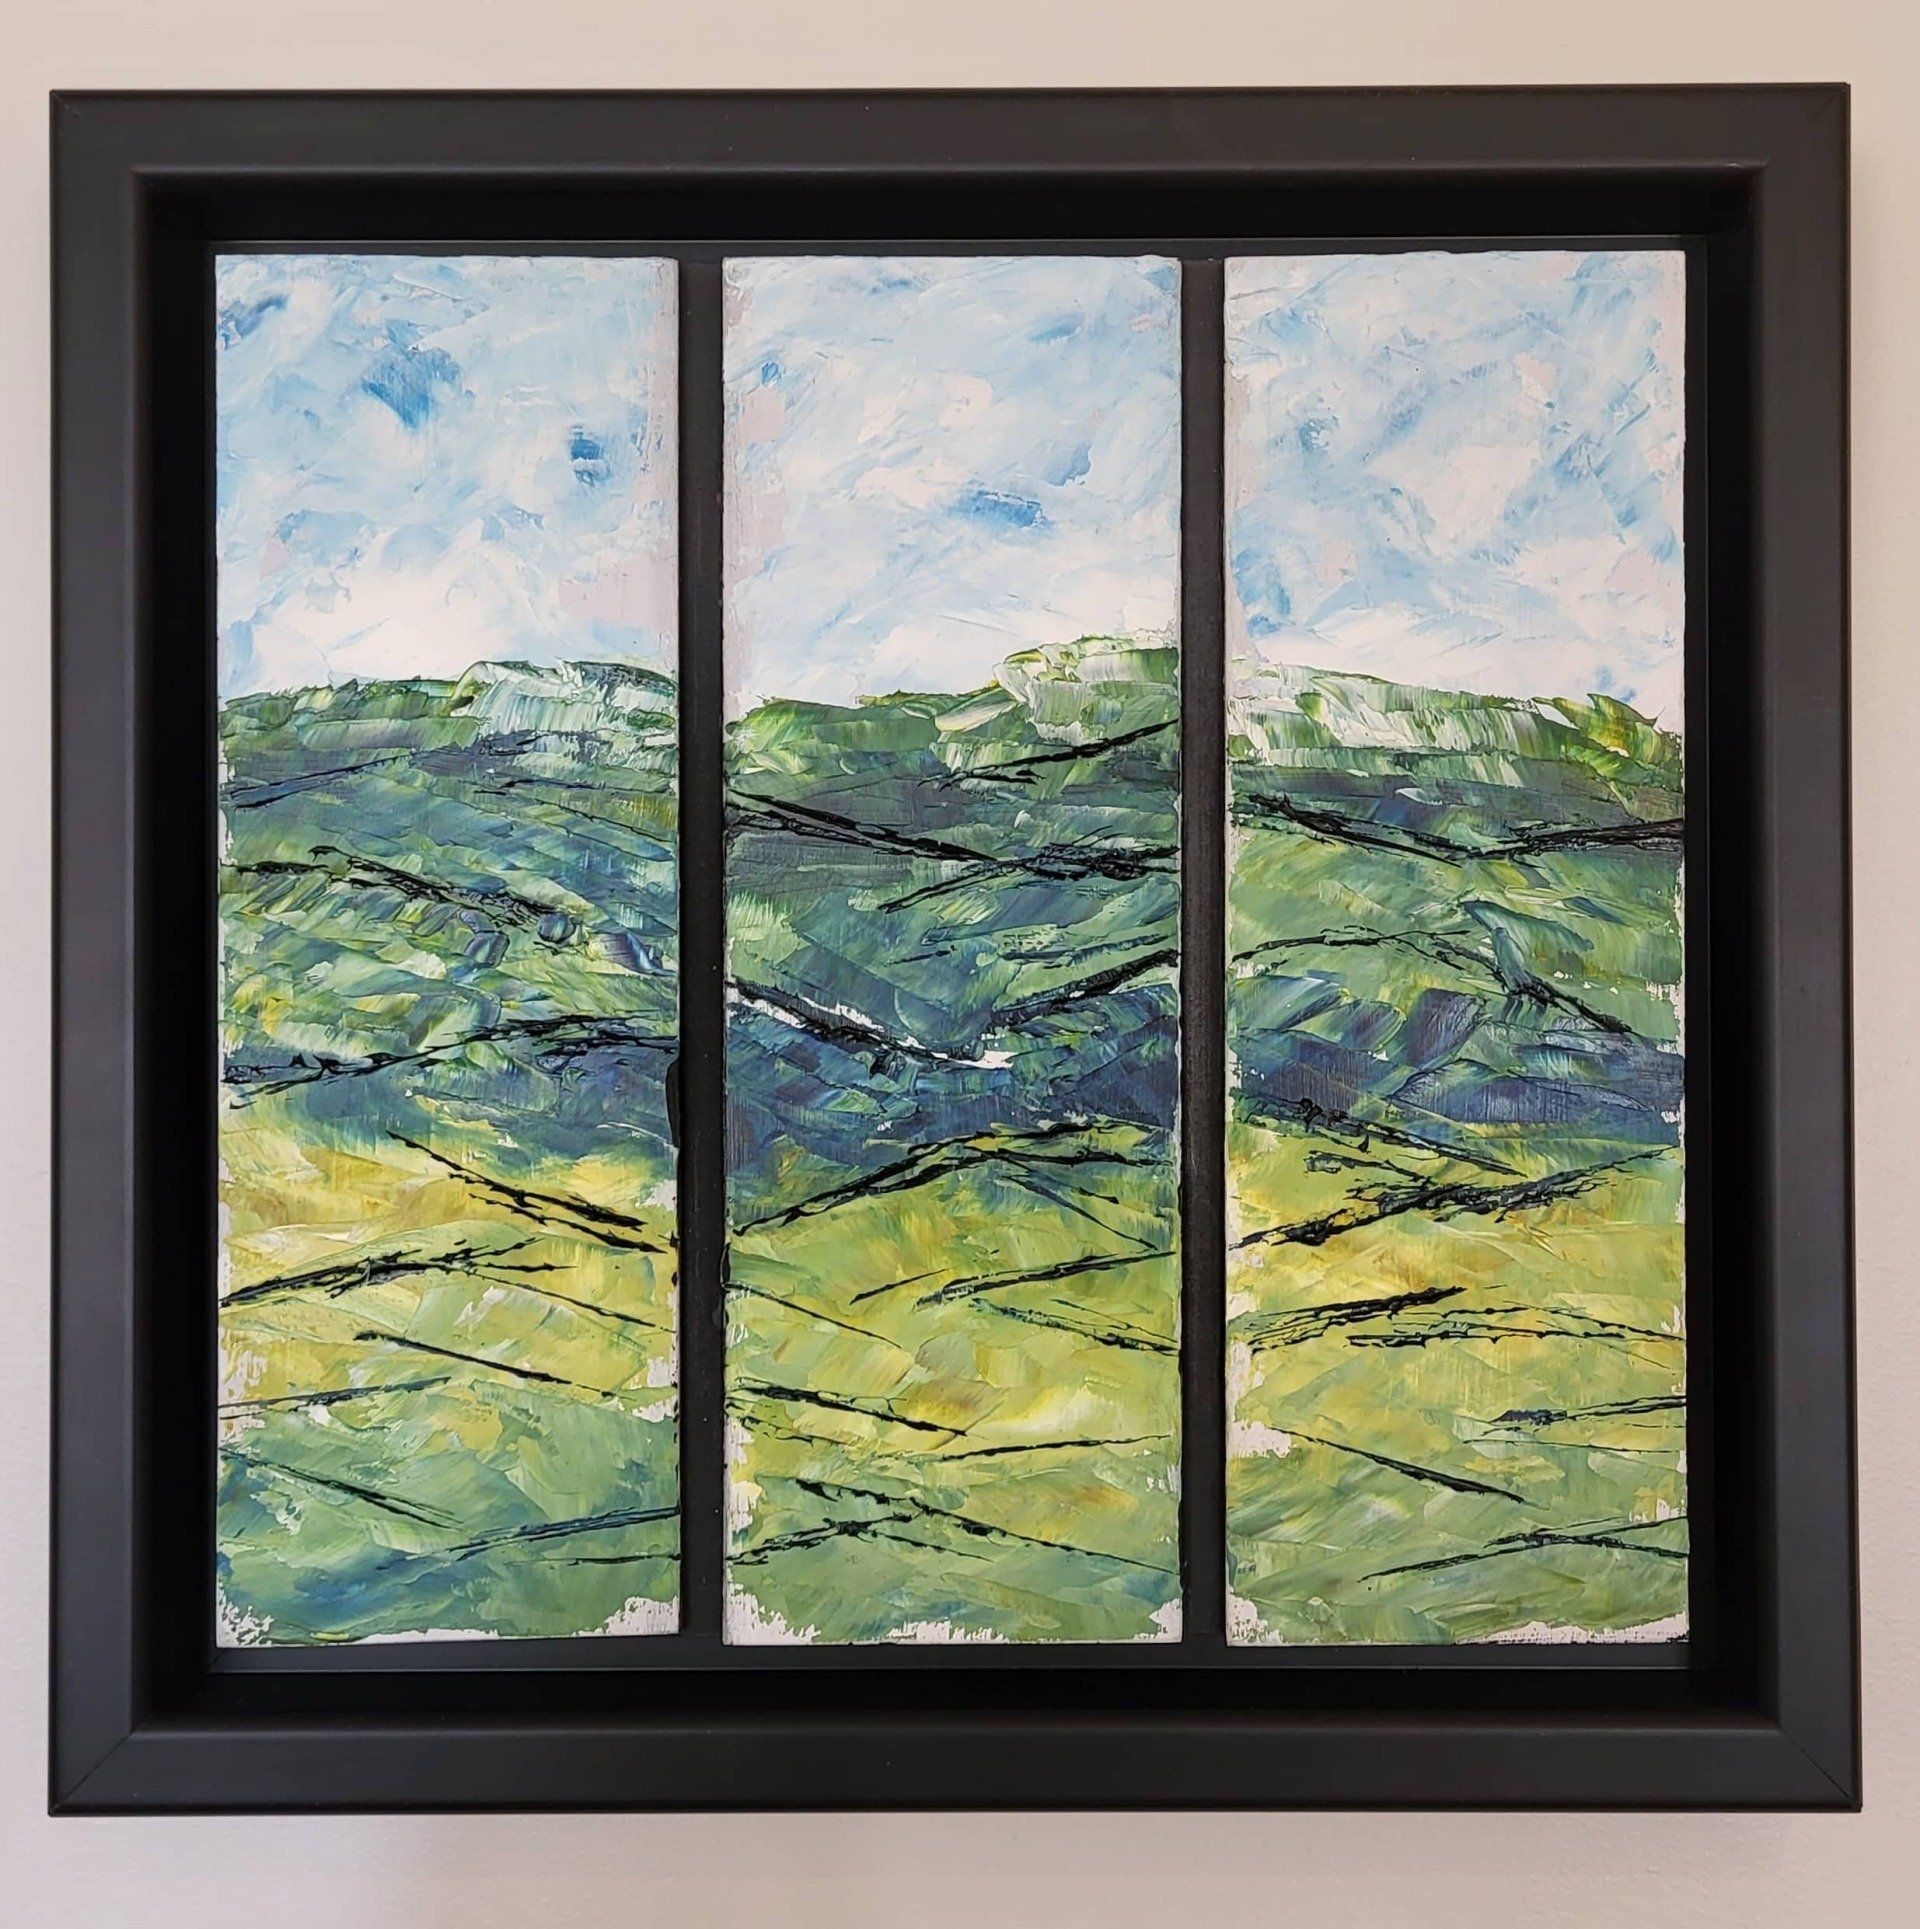 To order this miniature I use a code - #O 19-20-21. This Triptych Oil on Masonite (3 x 9in.x3in.) has a bright blue sky with bright white clouds moving past the mountain. The mountain positioned in the middle third of the painting is a blend of blue and green. The bottom third is a blend of yellow and swatches of blue creating a light green effect. The land part of the triptych has dark lines strategically placed to highlight the differences in the terrain.